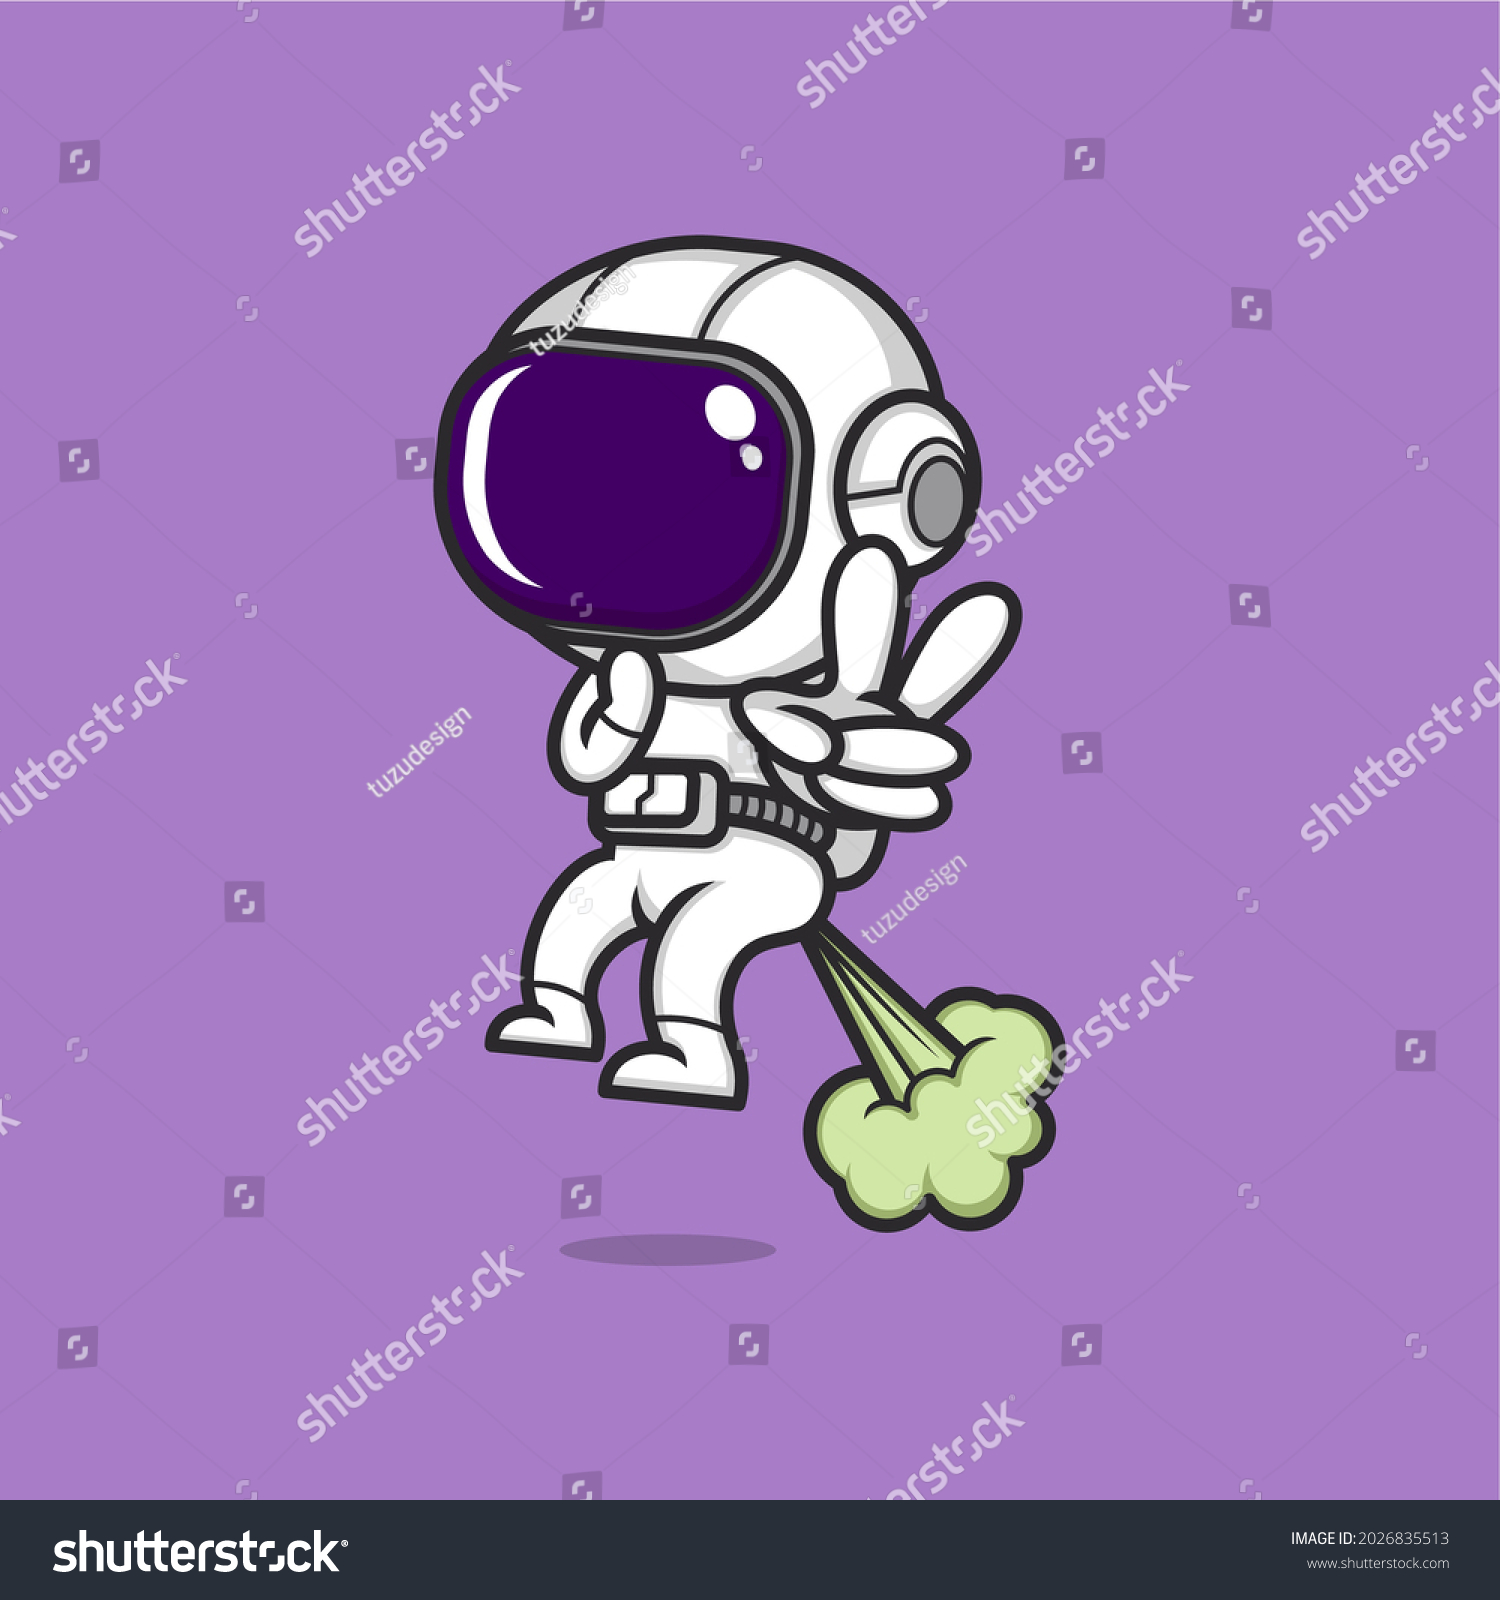 SVG of cartoon cute astronaut shy shy floating with fart power. vector illustration for mascot logo or accessories svg